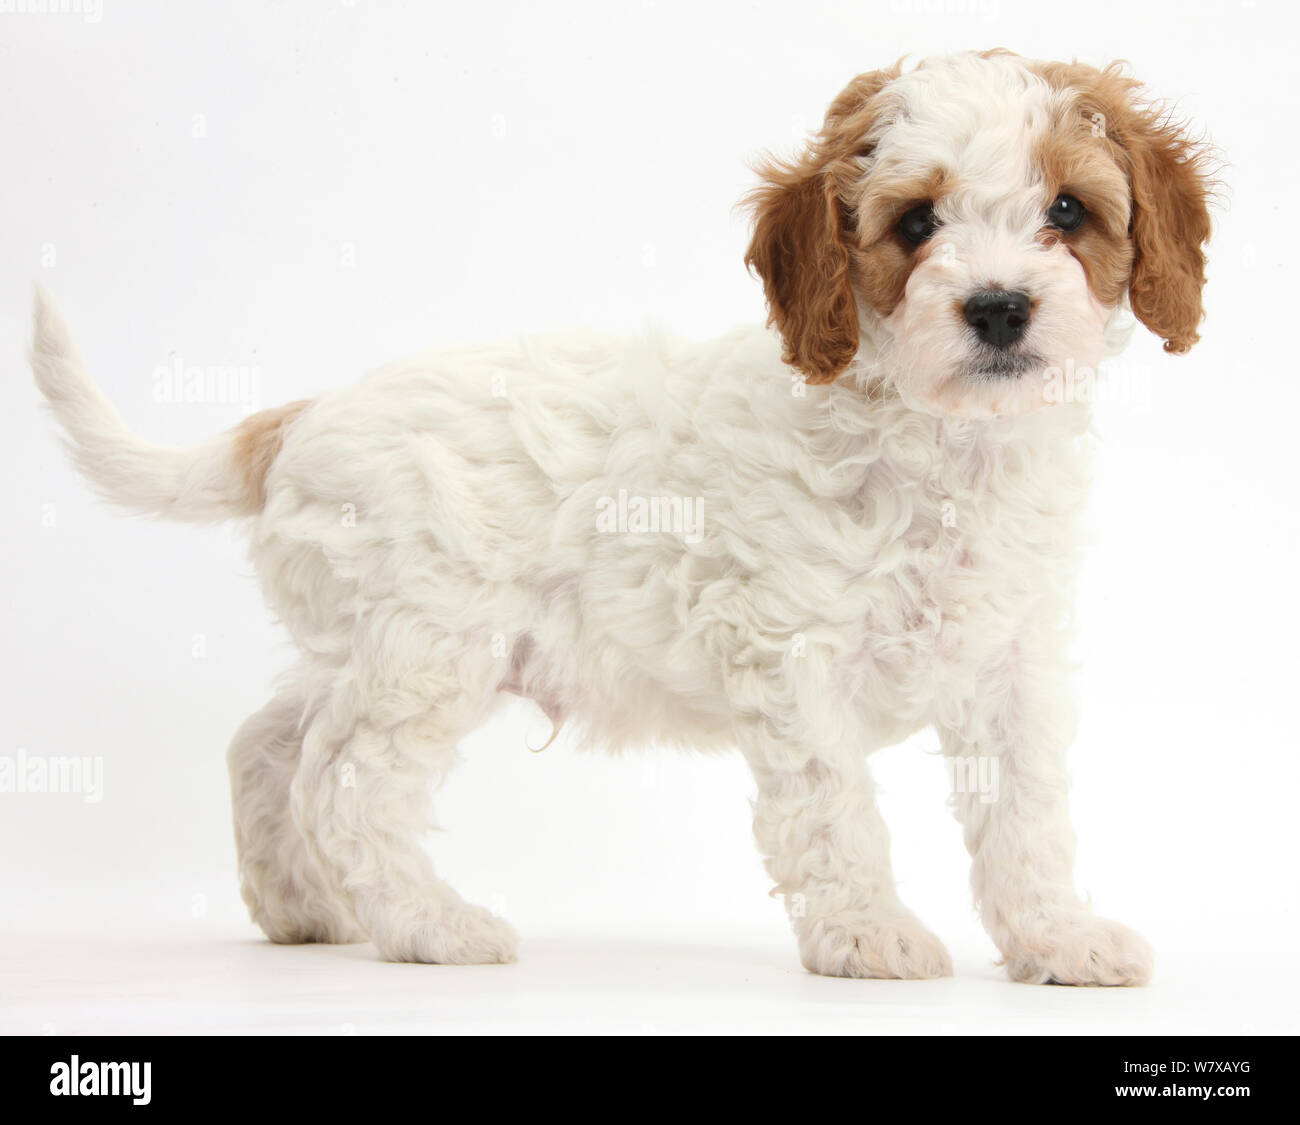 Cute red and white Cavalier King Charles Spaniel x Poodle 'Cavapoo' puppy, 6 weeks, standing. Stock Photo